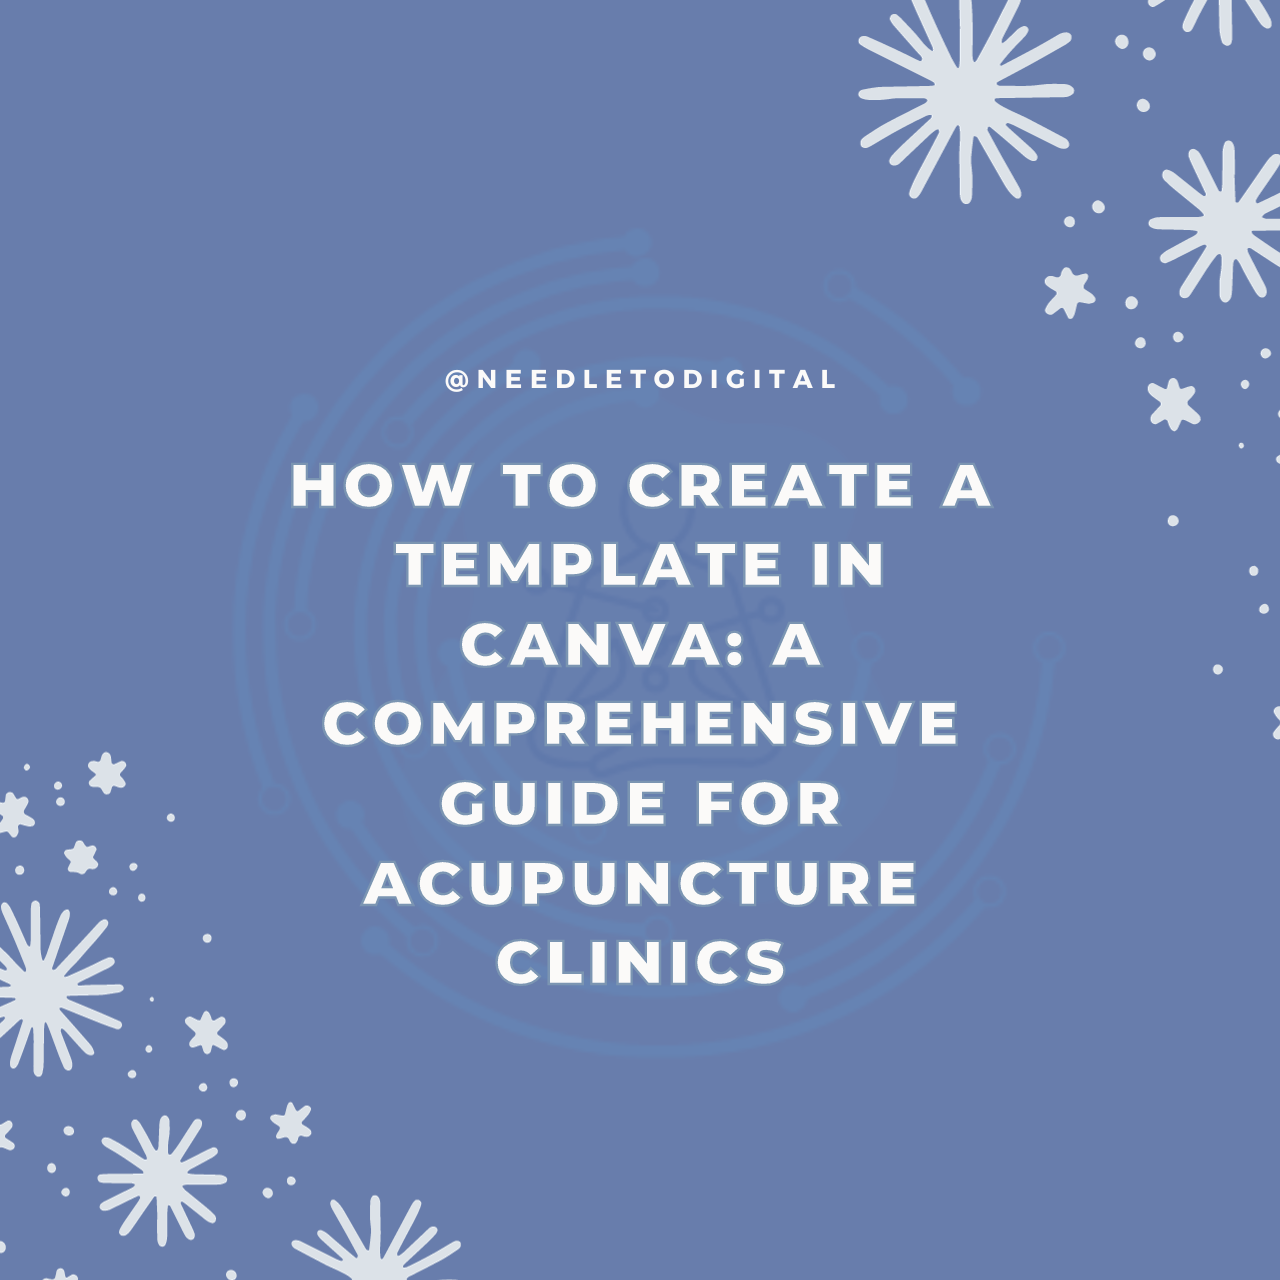 How to create a template in canva: A Comprehensive Guide for Acupuncture Clinics